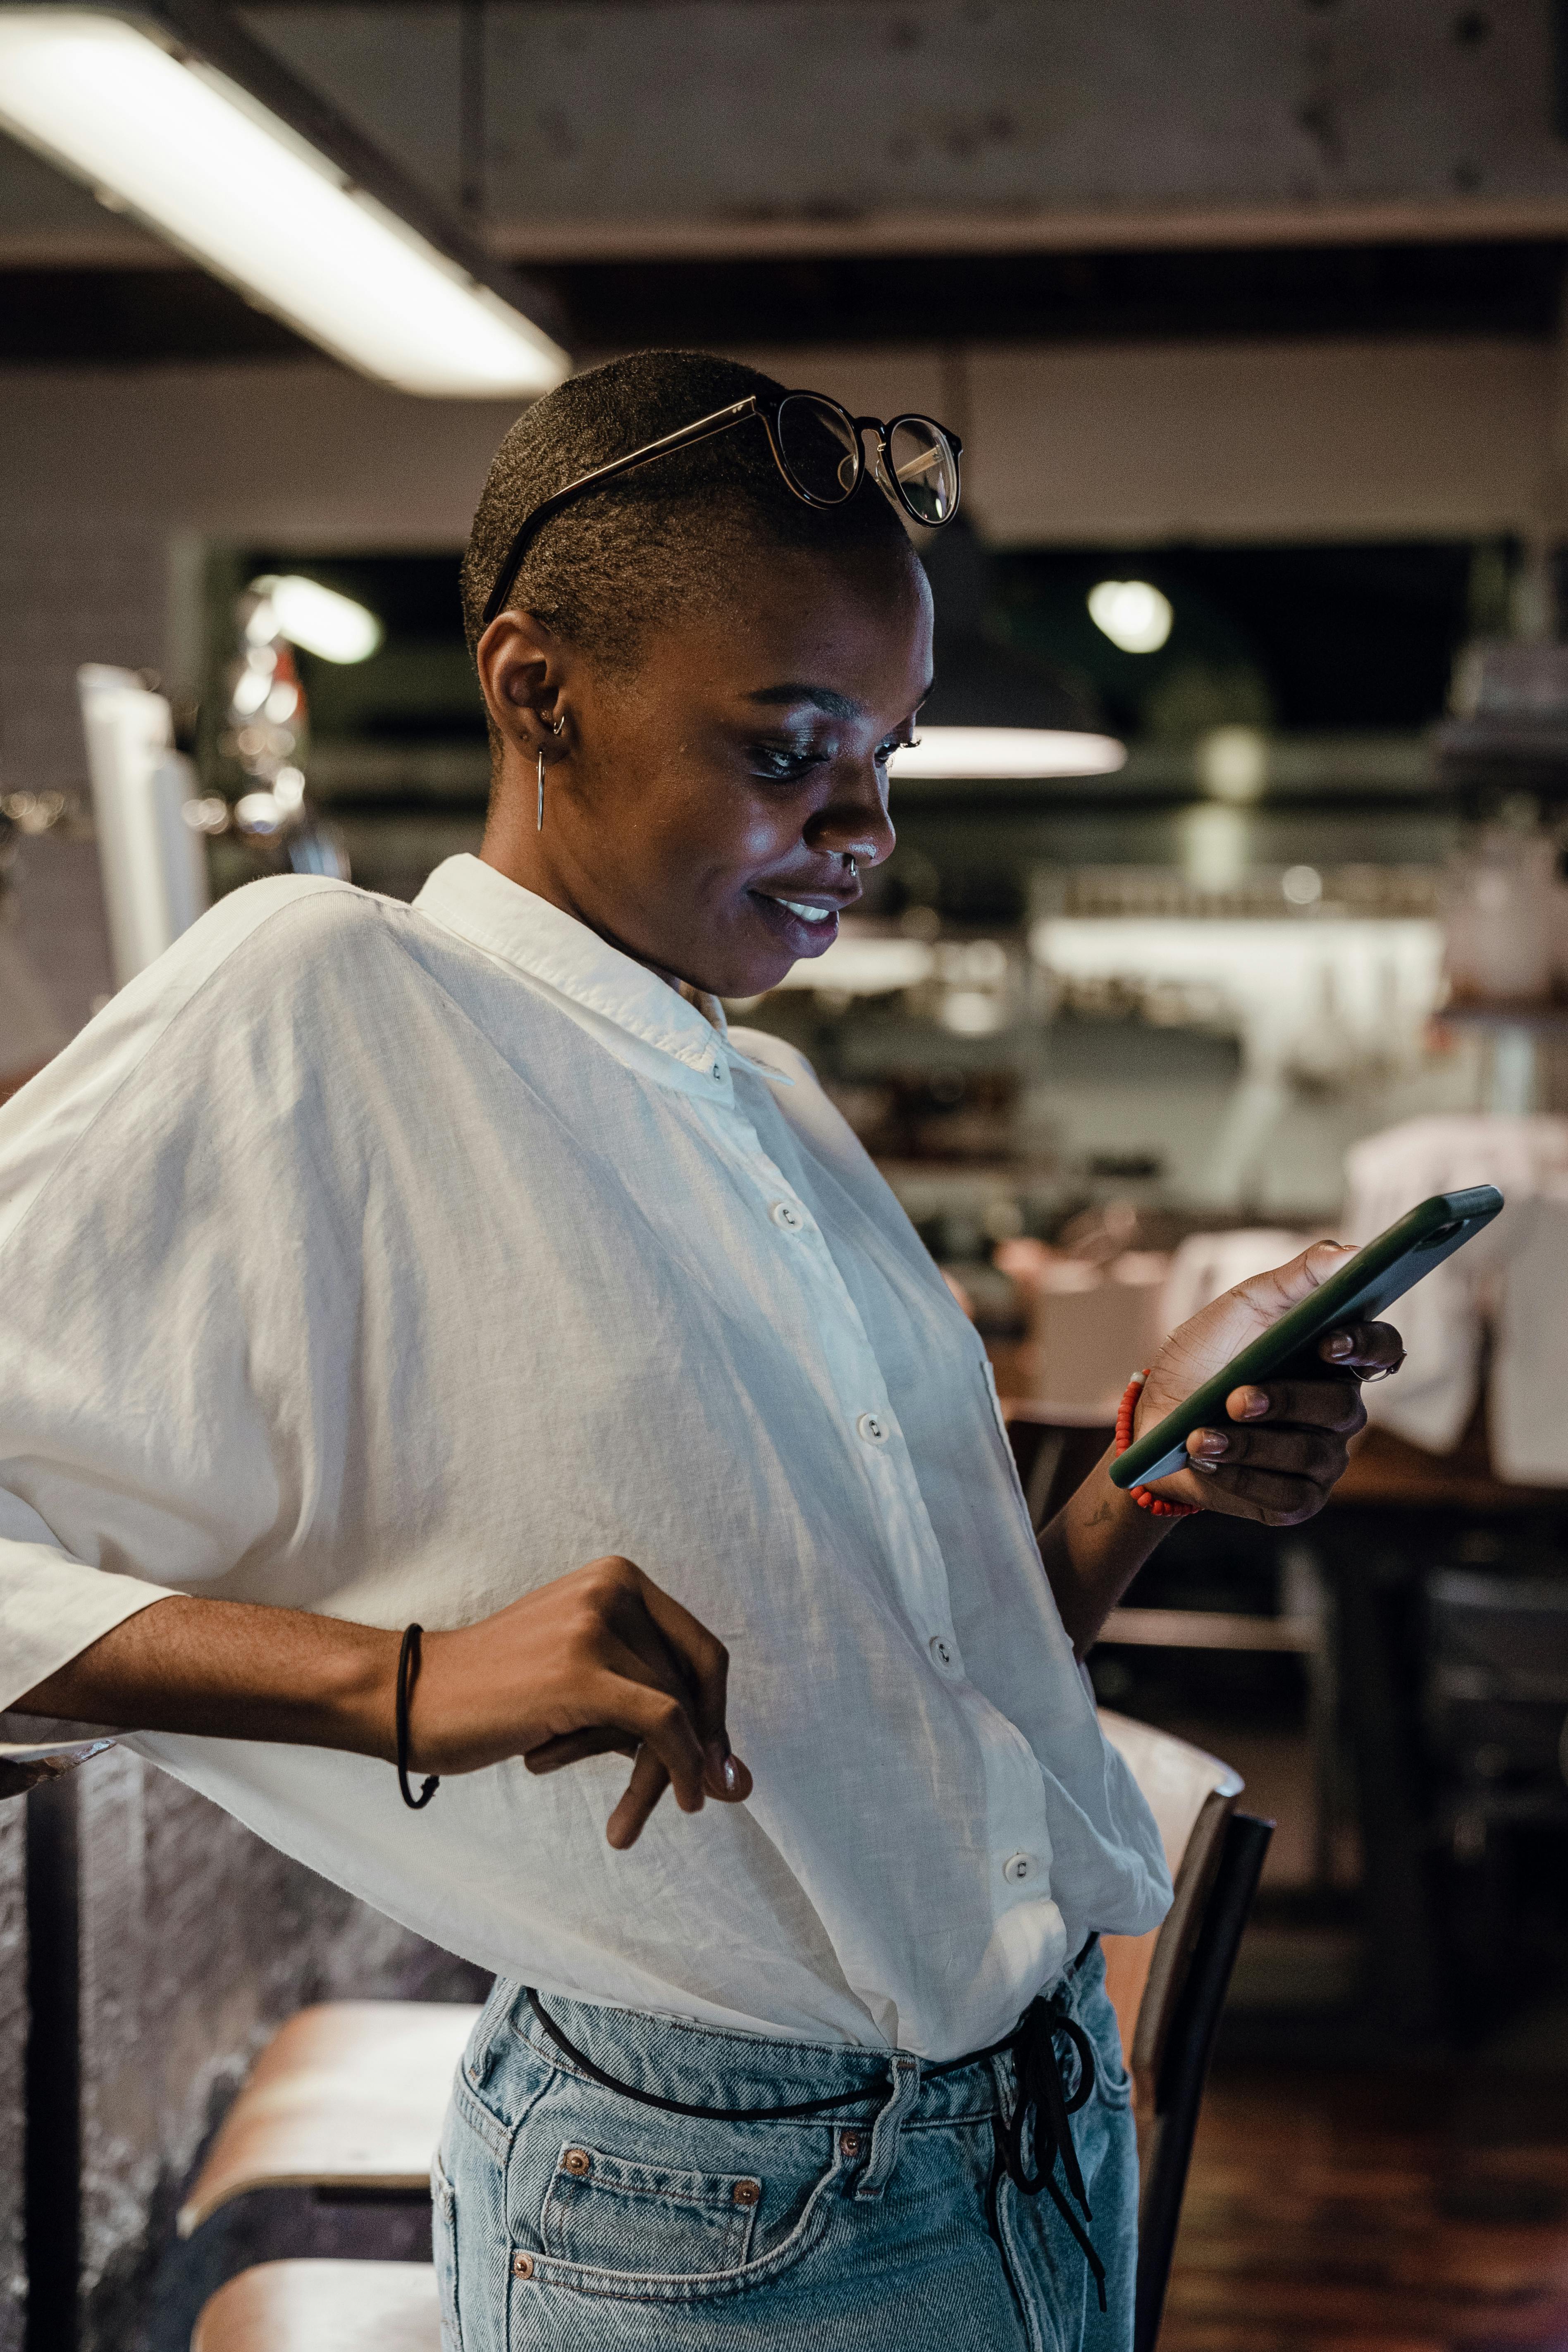 A happy woman looking at her phone at a café | Source: Pexels